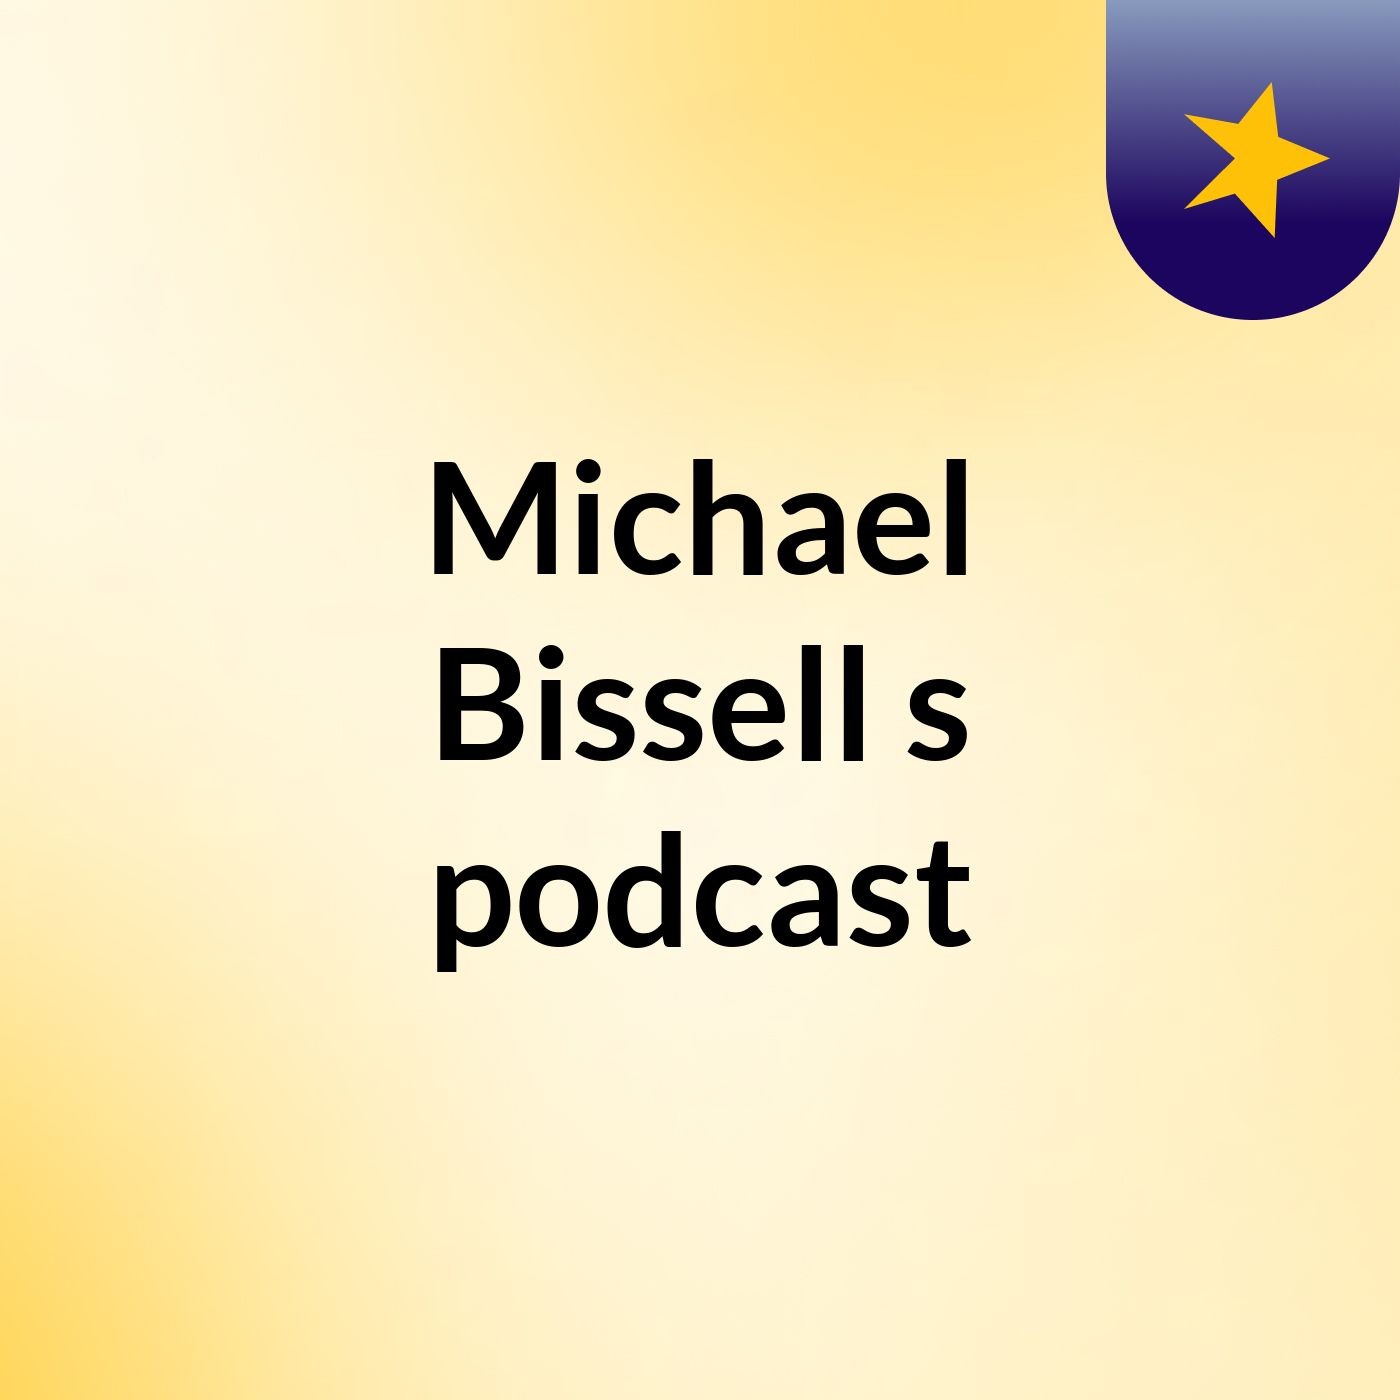 Michael Bissell's podcast